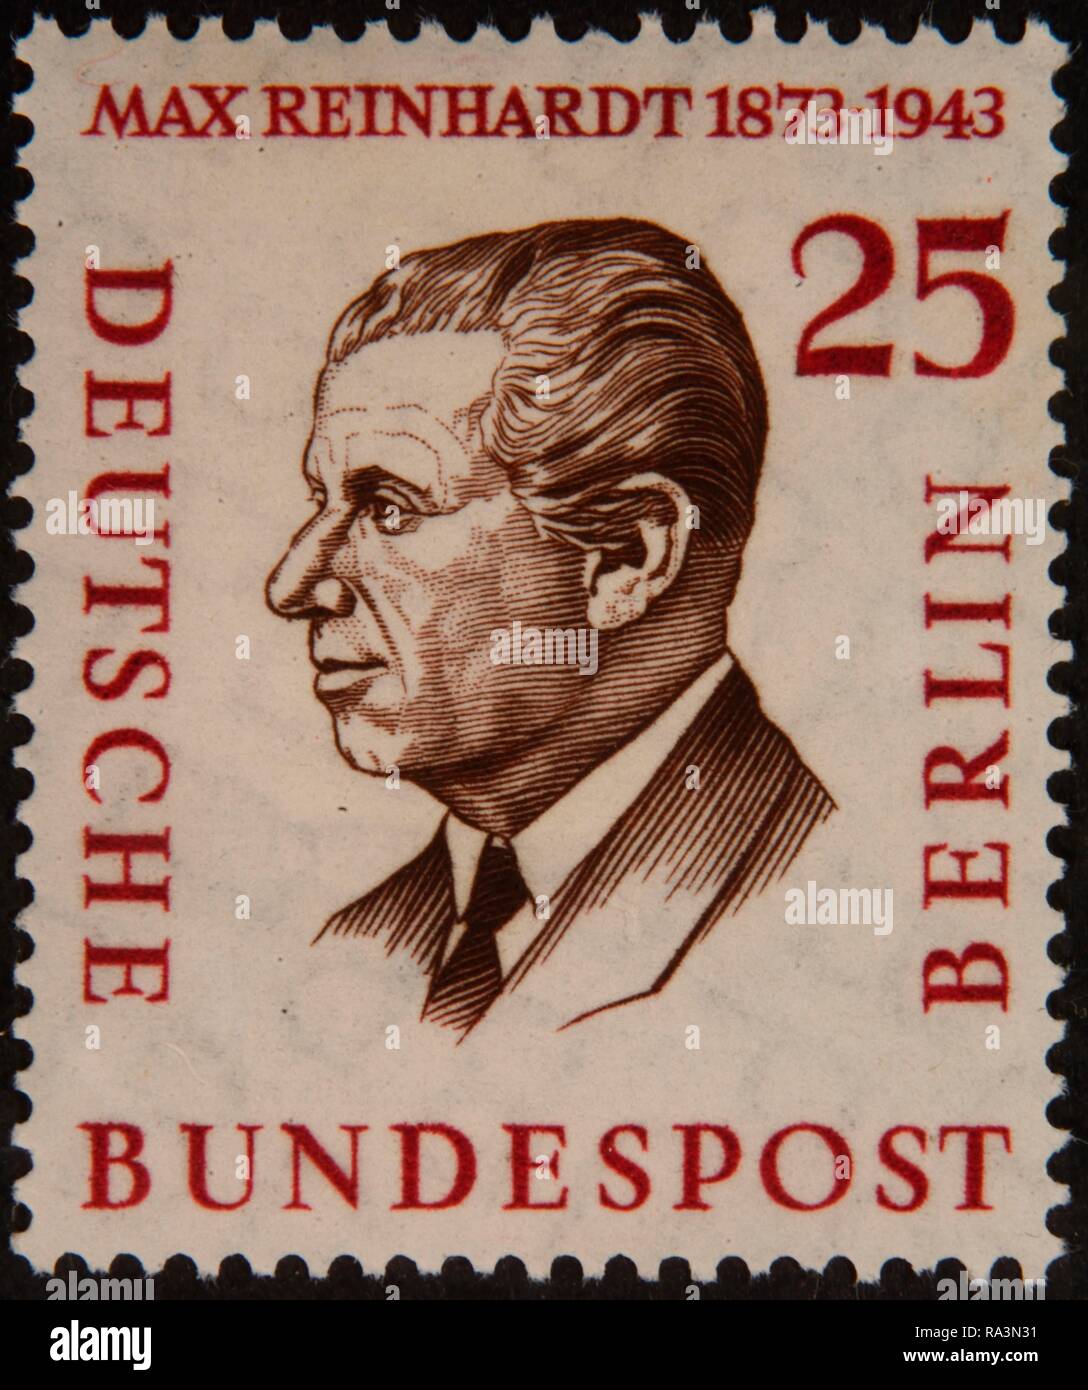 Max Reinhardt, an Austrian theatre and film director, intendant, and theatrical producer, portrait on a German stamp, Germany Stock Photo